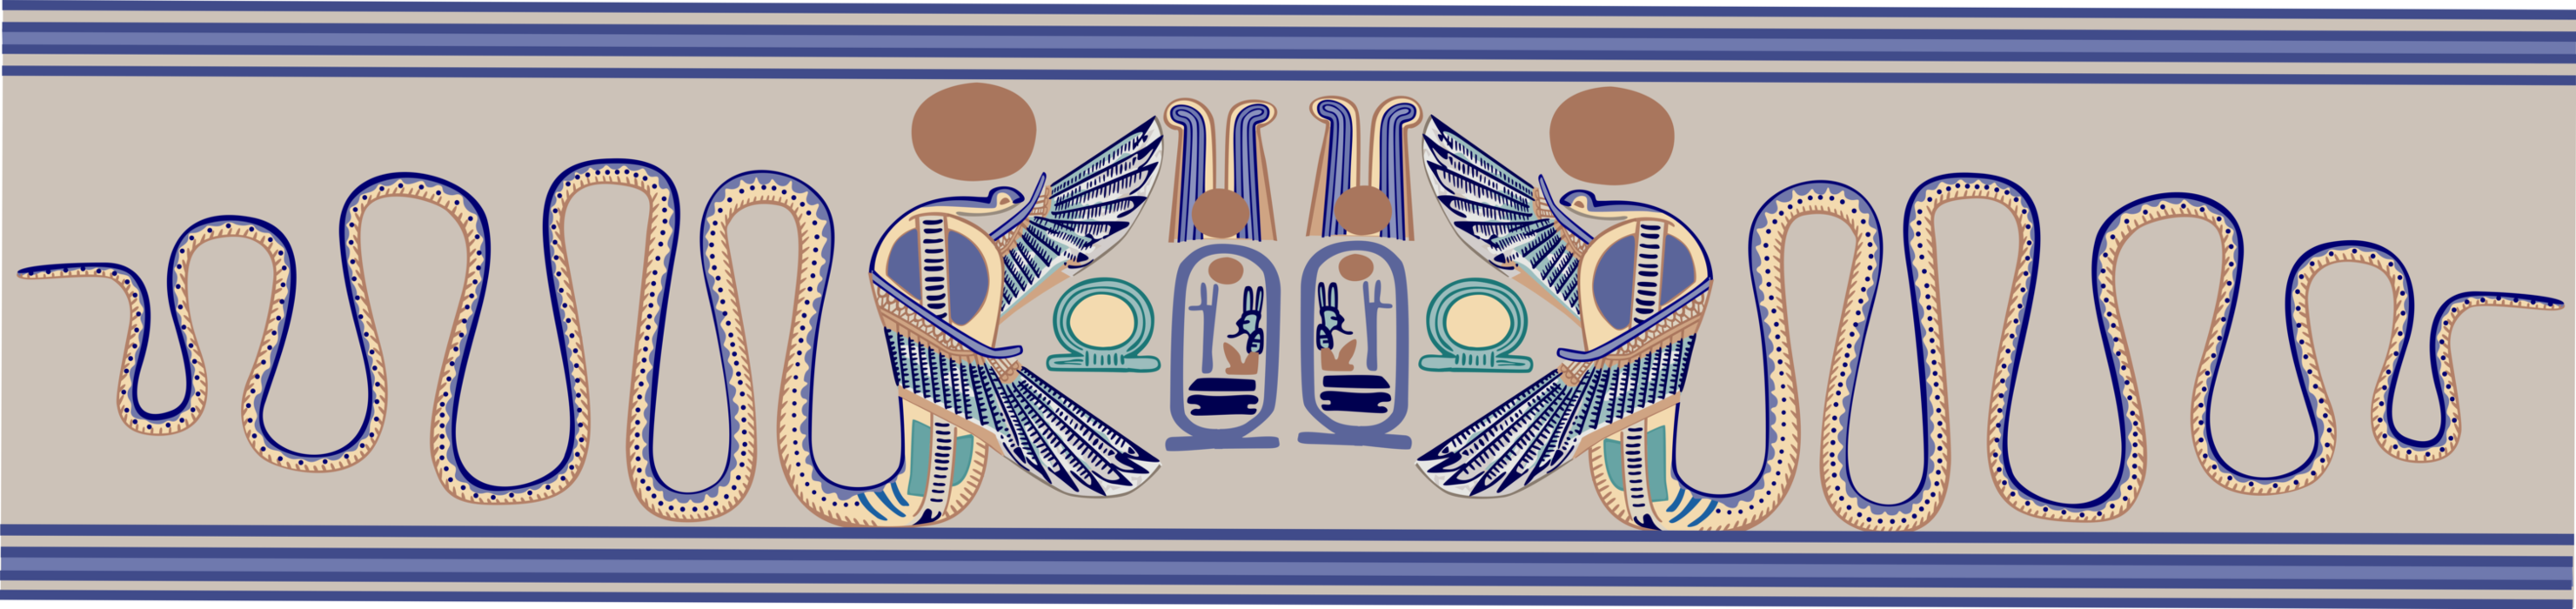 Vector Illustration of Ancient Egyptian Winged Symbol Border